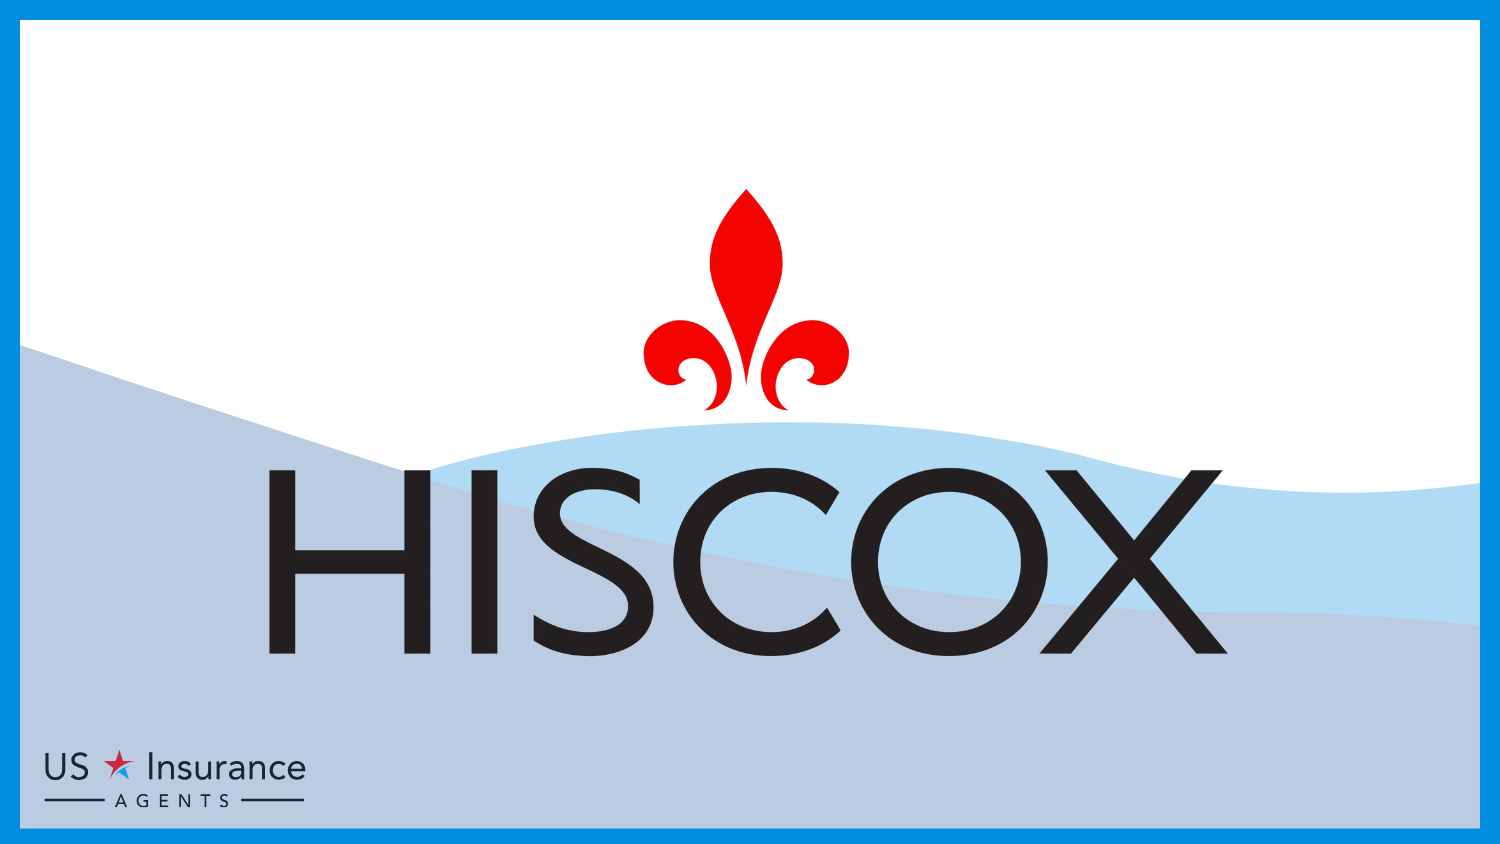 Hiscox: Best Business Insurance for Digital Publishers